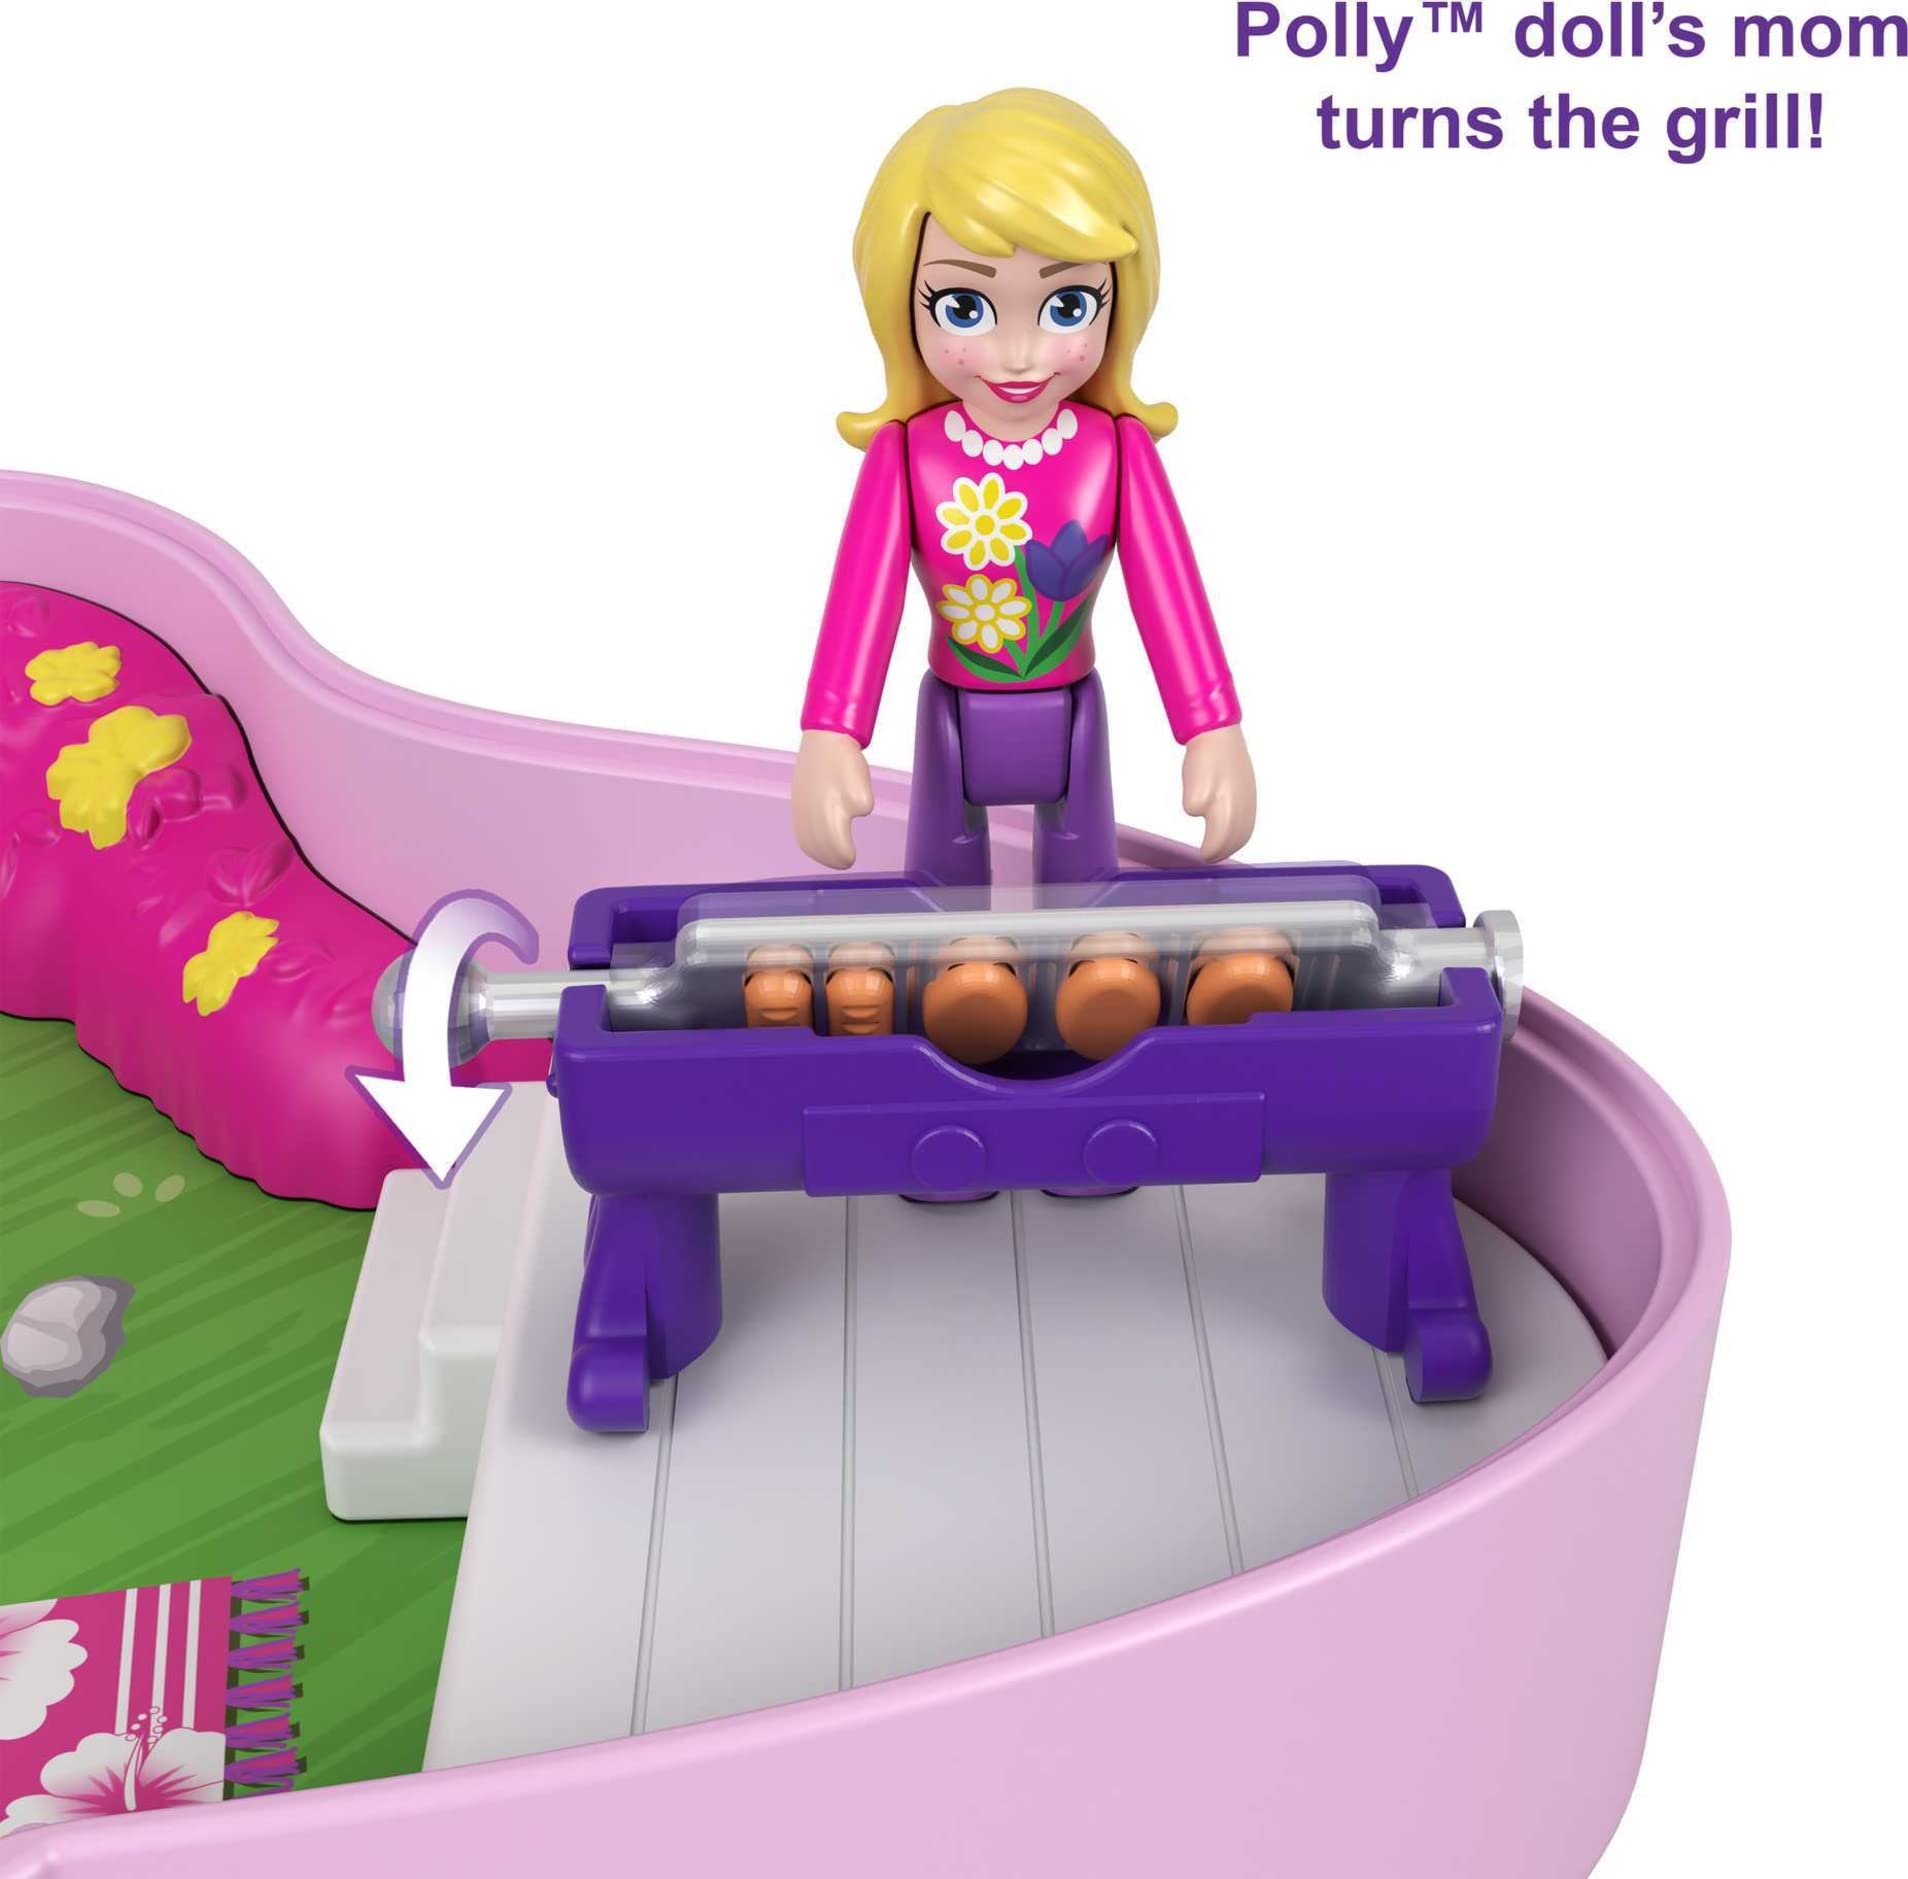 Polly Pocket Compact Playset, Backyard Butterfly with 2 Micro Dolls & Accessories, Travel Toys with Surprise Reveals (Amazon Exclusive)